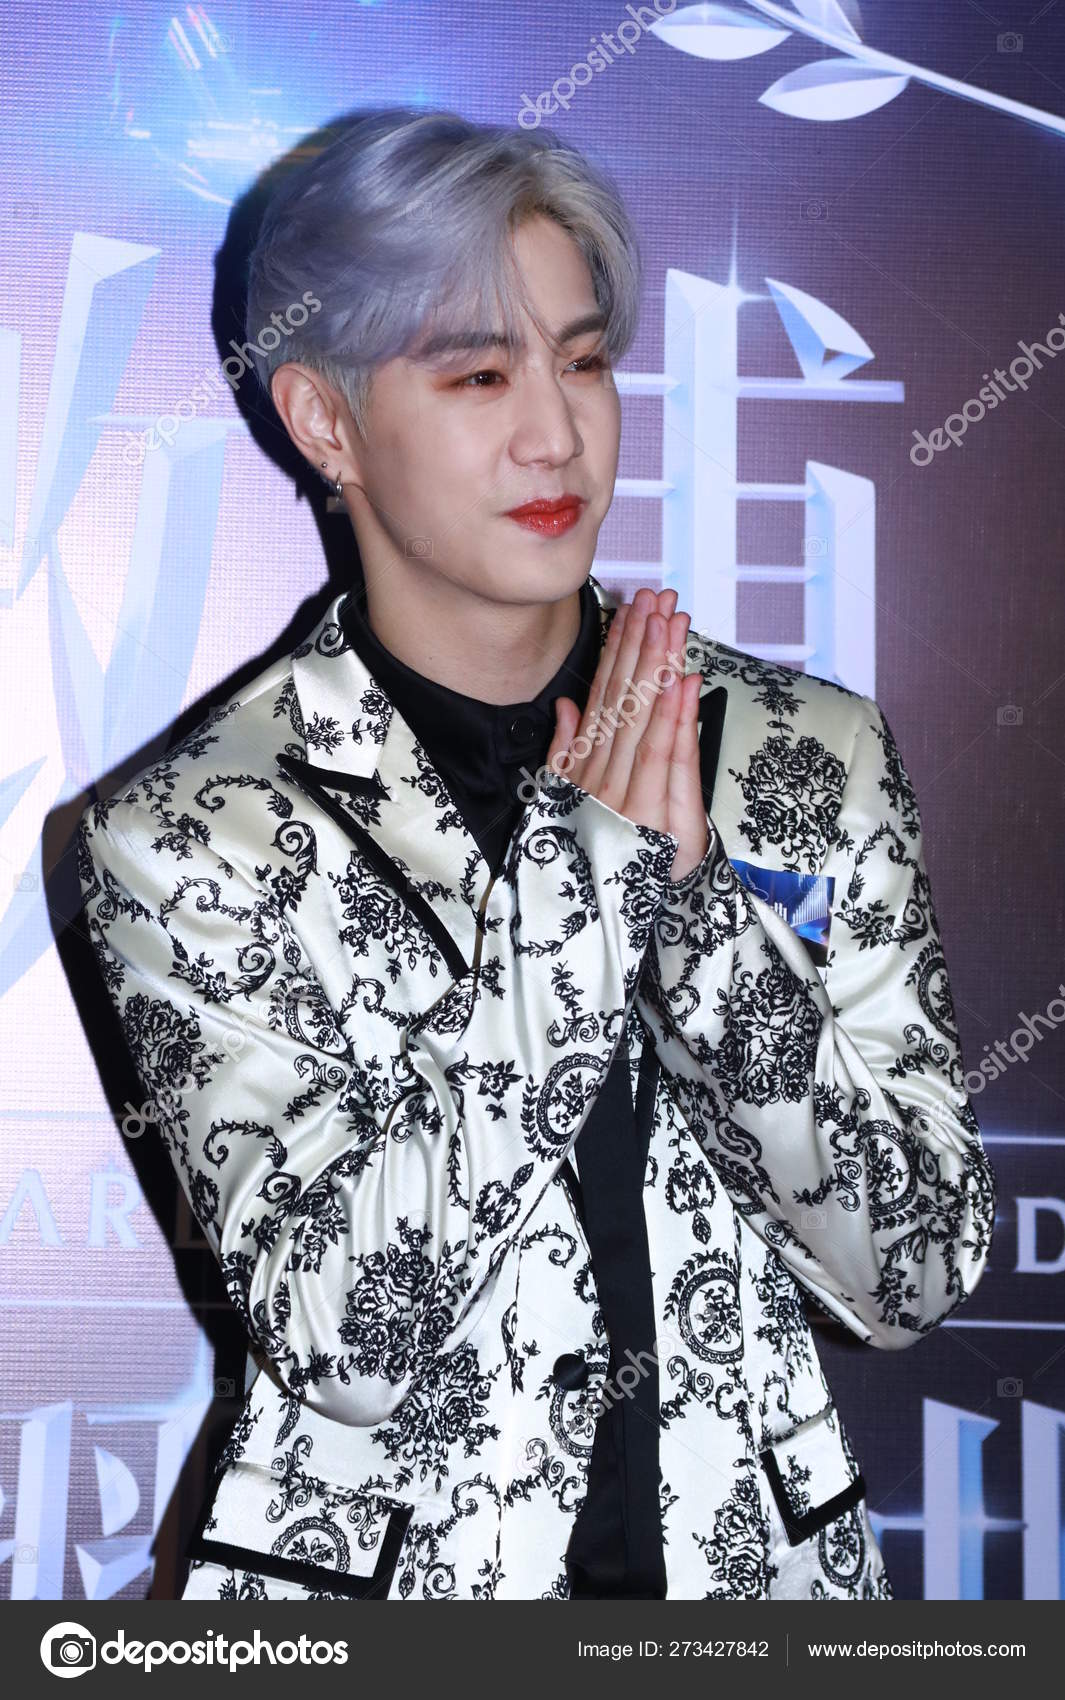 South Korean actor and singer Cha Eun-woo, member of South Korean boy group  Astro, attends a photo call for the Louis Vuitton launching at Louis  Vuitton Seoul in Seoul, South Korea on